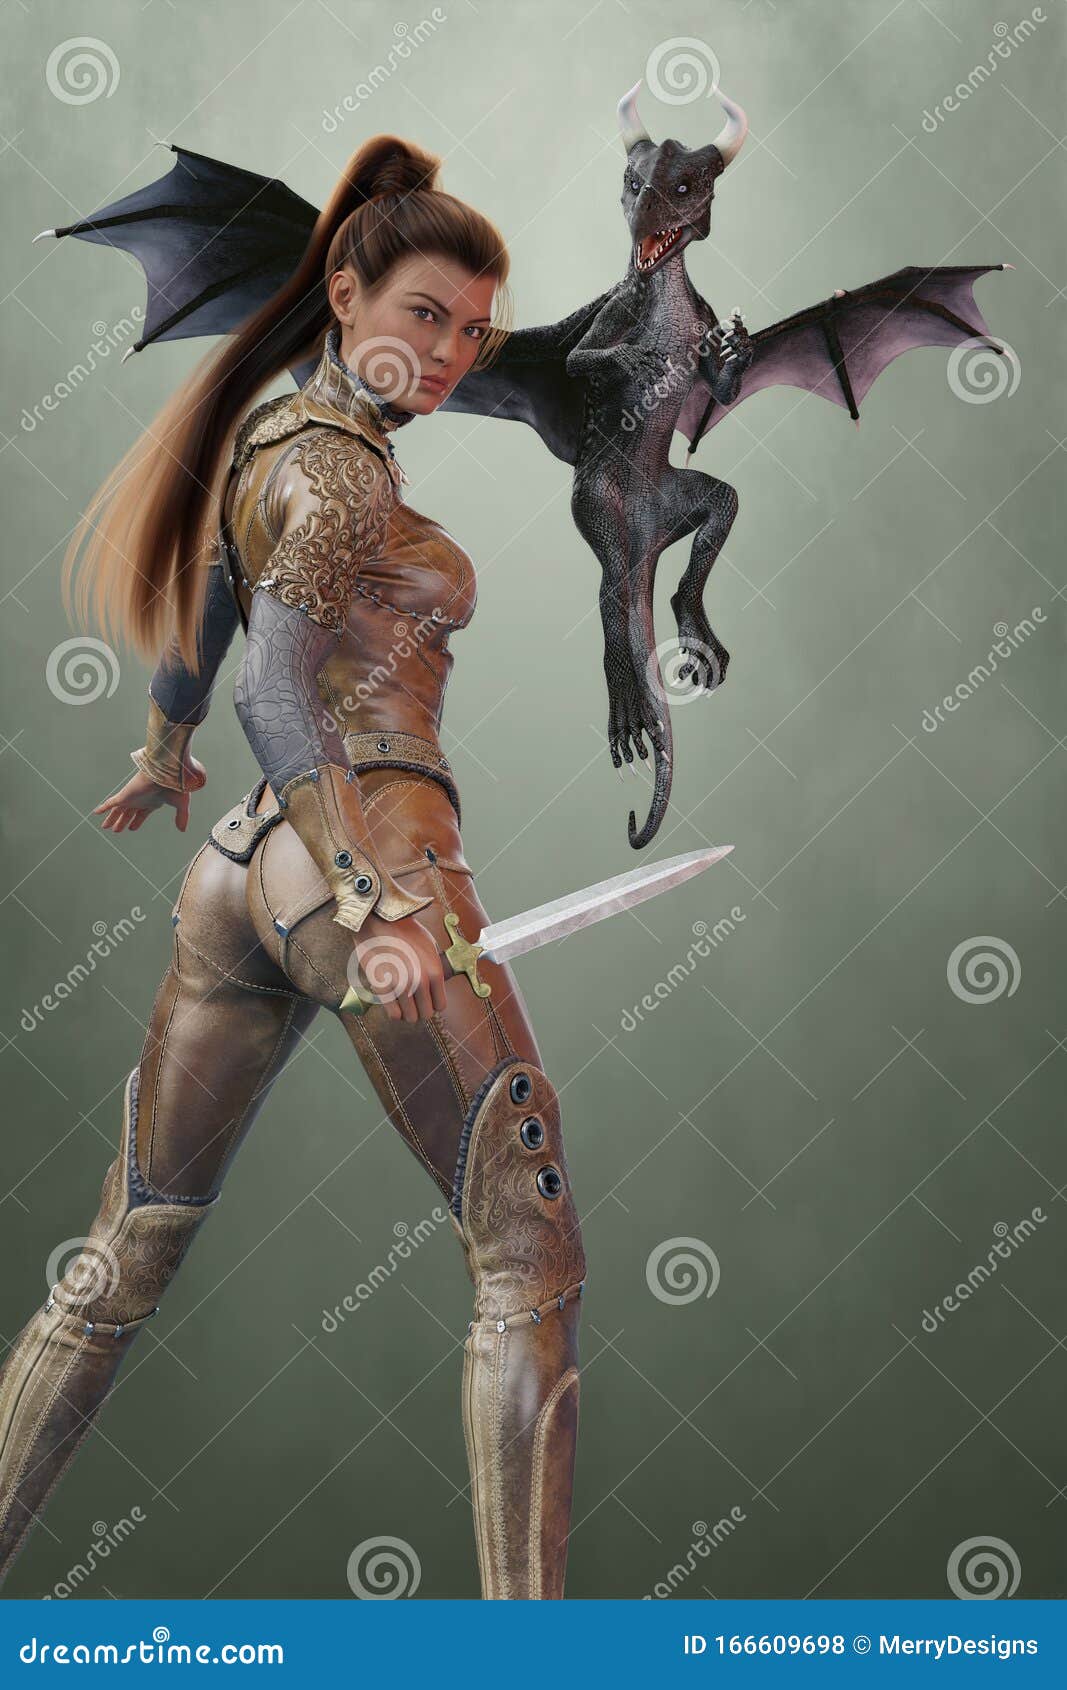 cg fantasy woman dragon keeper her young hatchling rendering beautiful leather suited warrior ready to fight pose 166609698